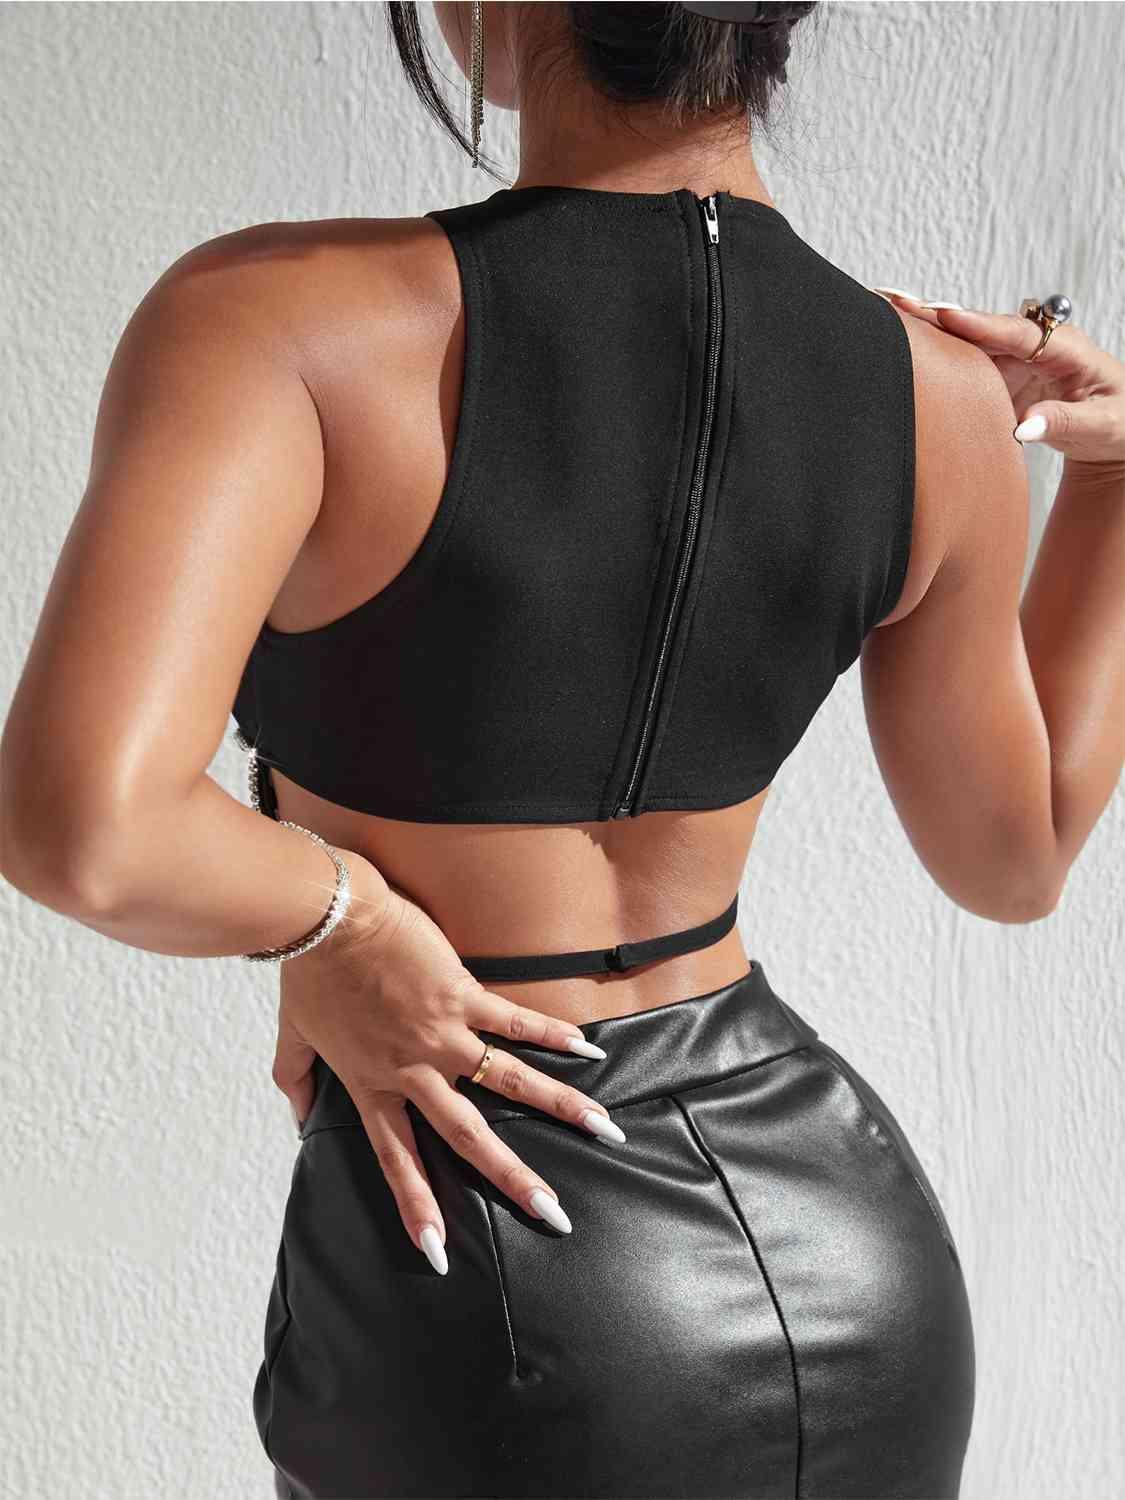 a woman wearing a black crop top and leather skirt